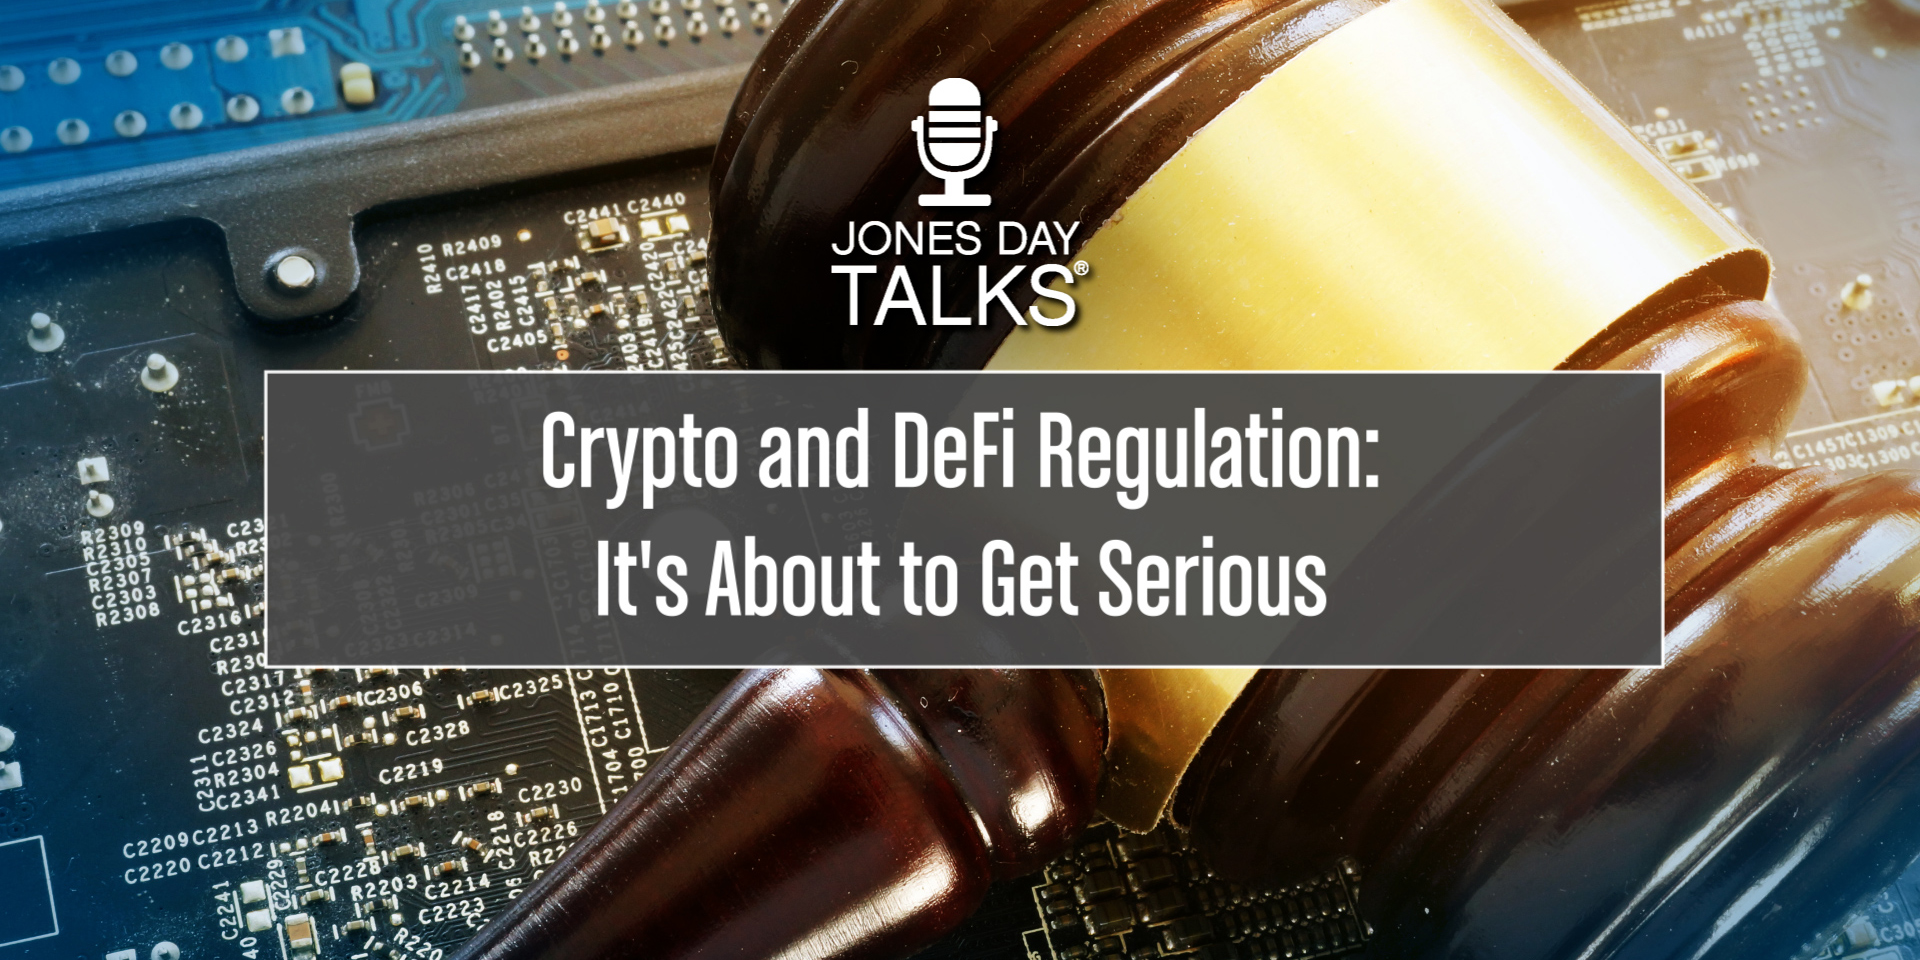 Crypto and DeFi Regulation Is About to Get Serious | Jones Day